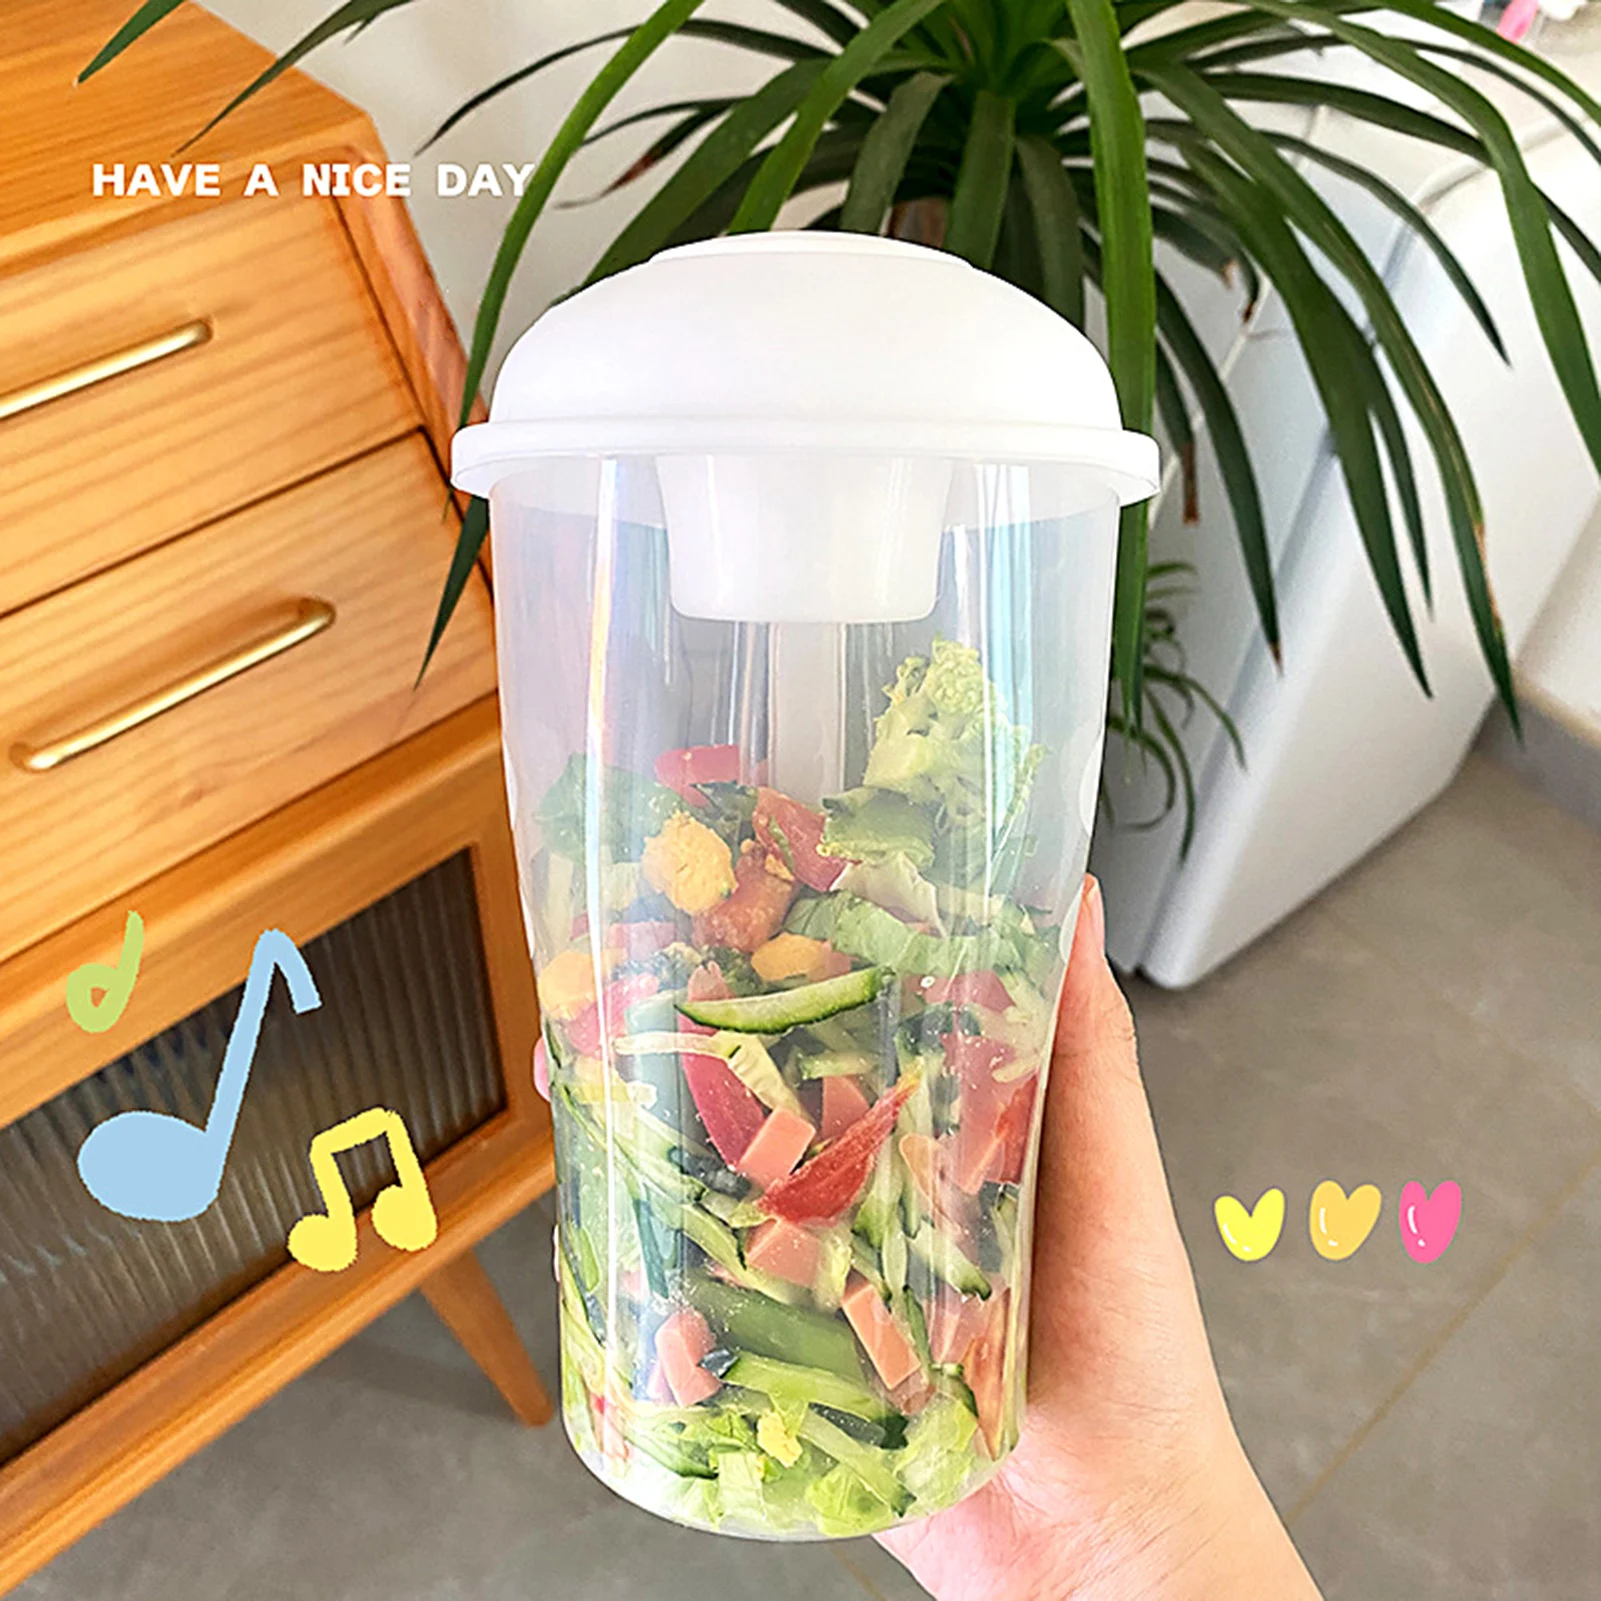 https://ae01.alicdn.com/kf/Sd0177a5e6a964e96bb7f1e22ebded261Q/Portable-800ml-Salad-Shaker-Cup-Salad-Container-With-Fork-Breakfast-Salad-Cup-Mason-Cup-Yogurt-Cup.jpg